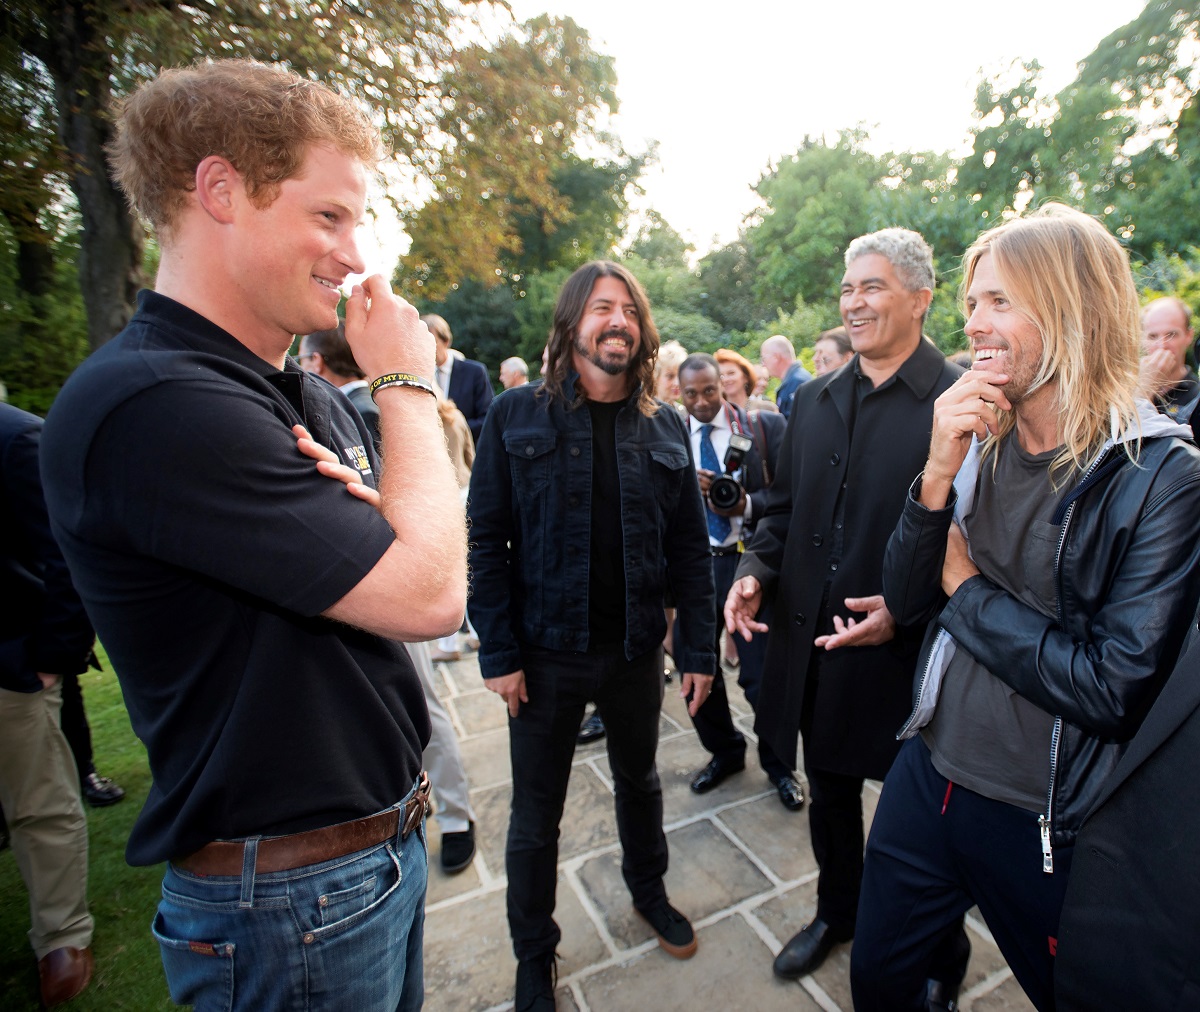 Prince Harry speaking outdoors with singer Dave Grohl and drummer Taylor Hawkins of the Foo Fighters